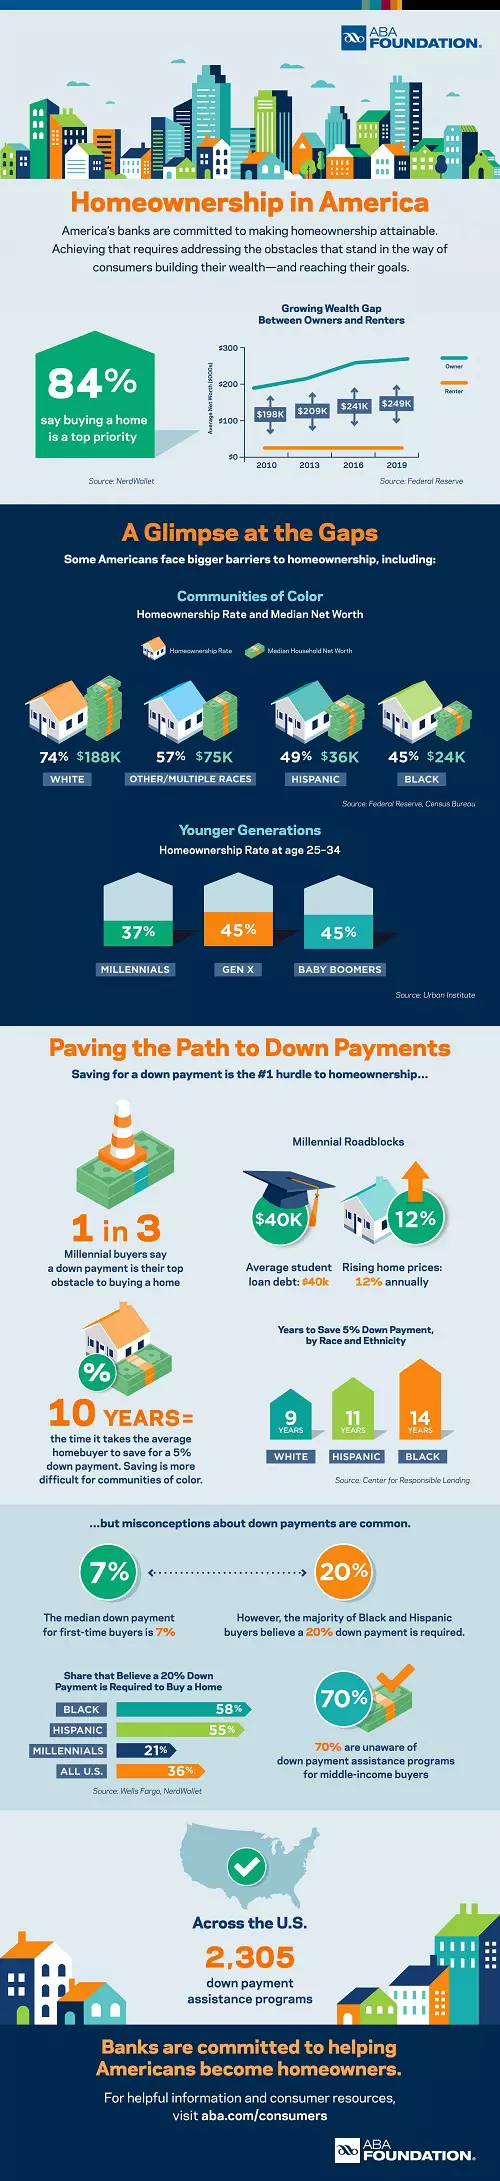 homeownership in america infographic